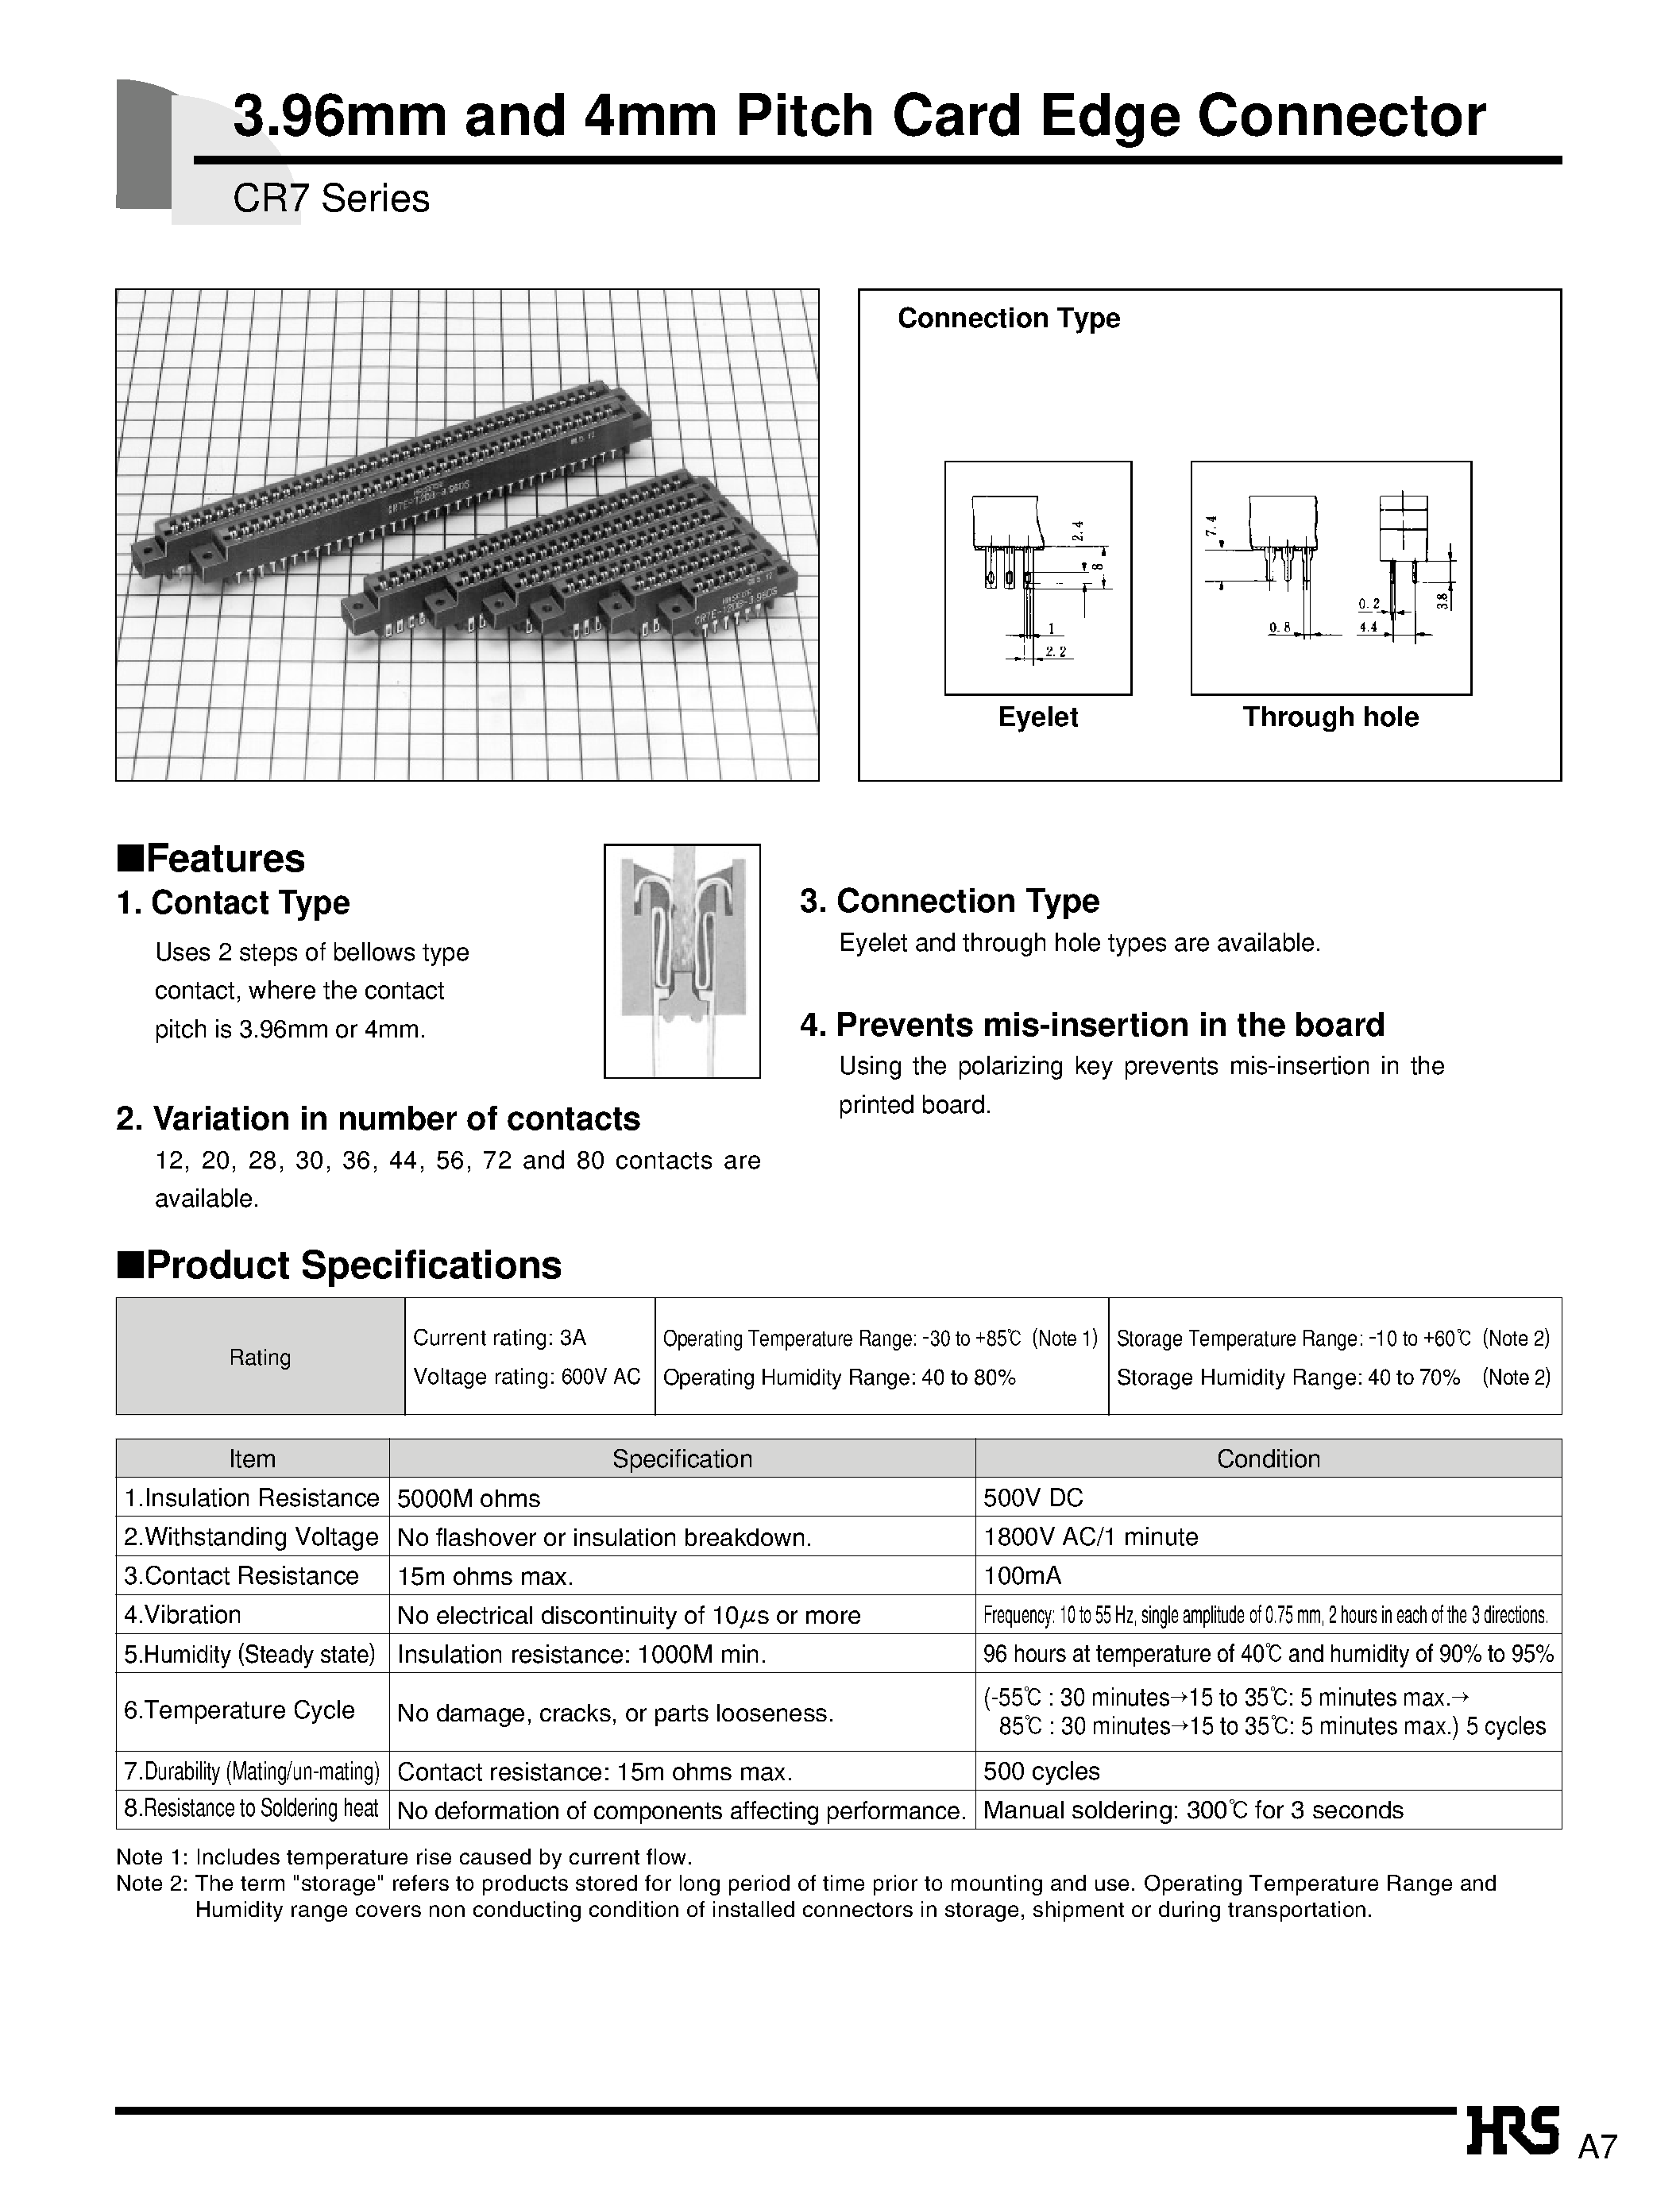 Datasheet CR7E-36DB-3.96E - 3.96mm and 4mm Pitch Card Edge Connector page 1